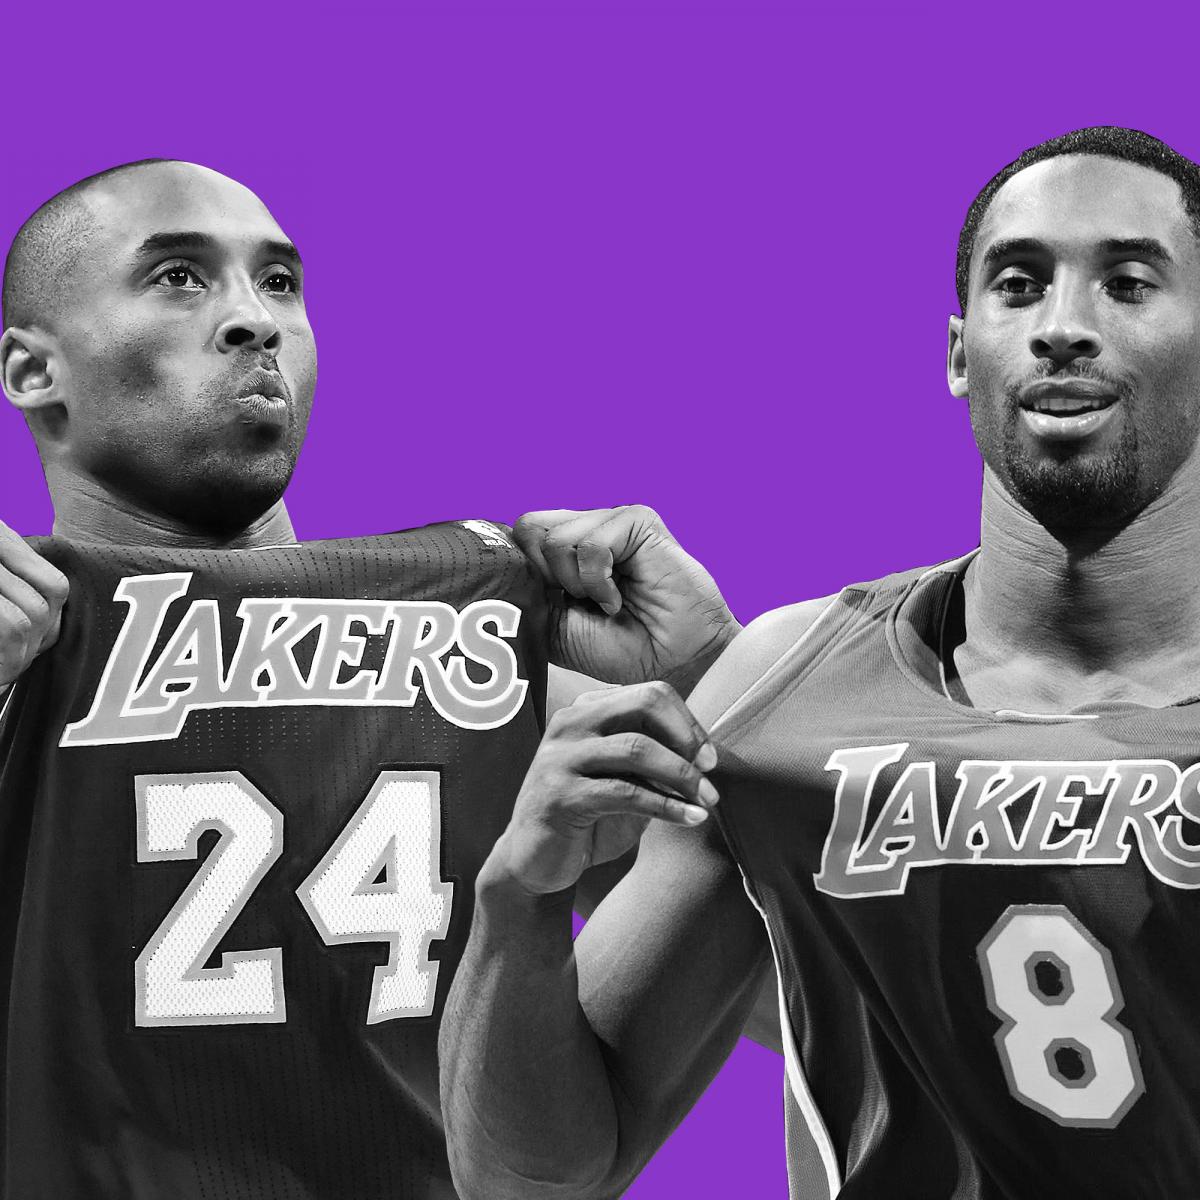 Lakers to wear Kobe Bryant tribute jerseys in playoffs, per report